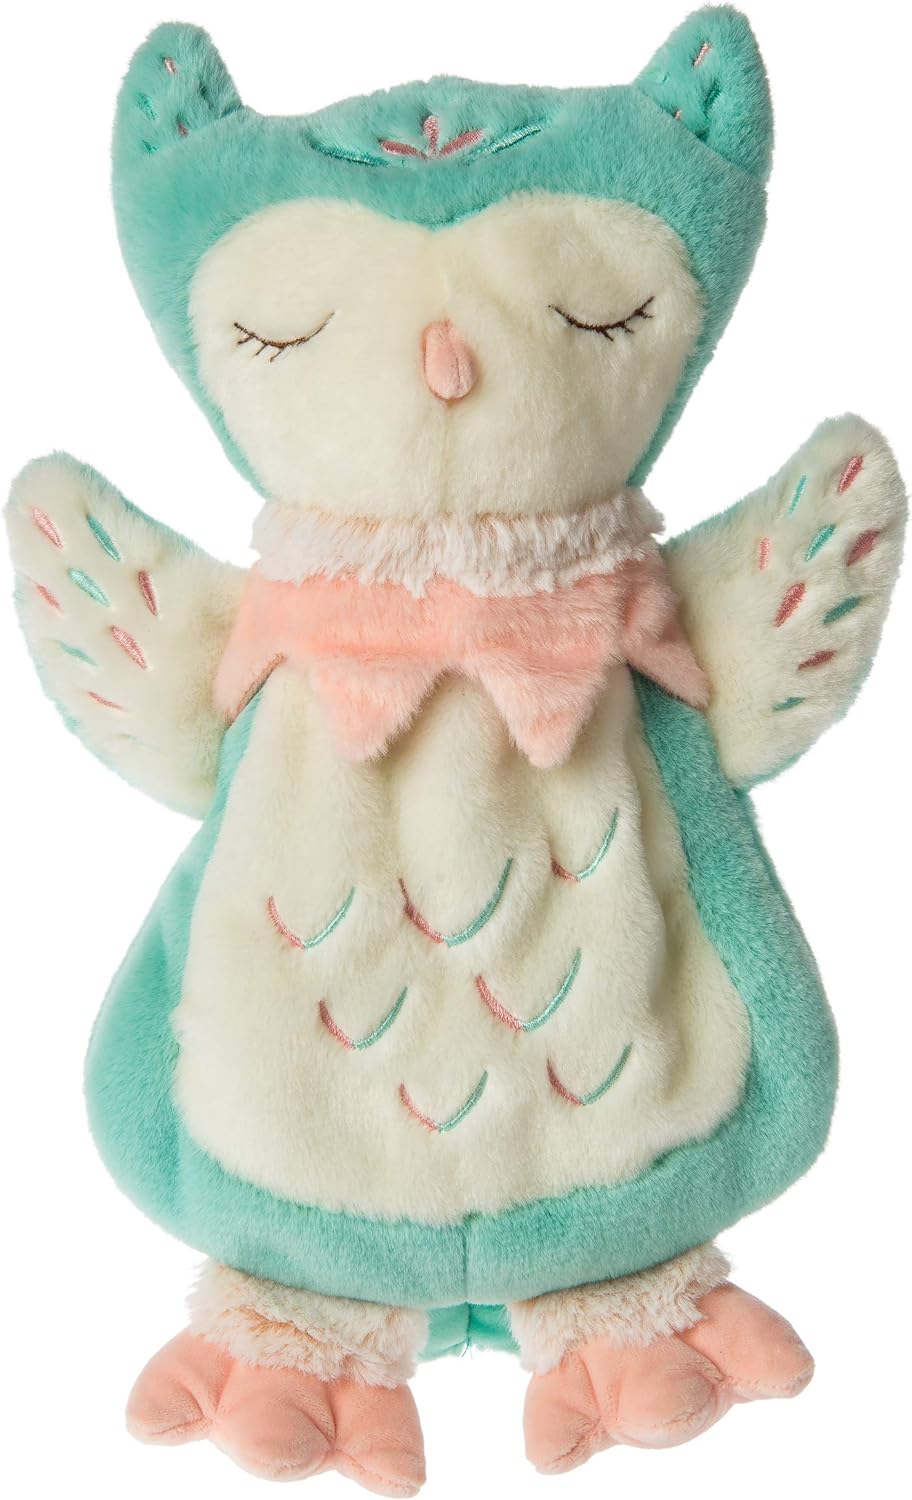 Cream, teal and pink owl soft toy